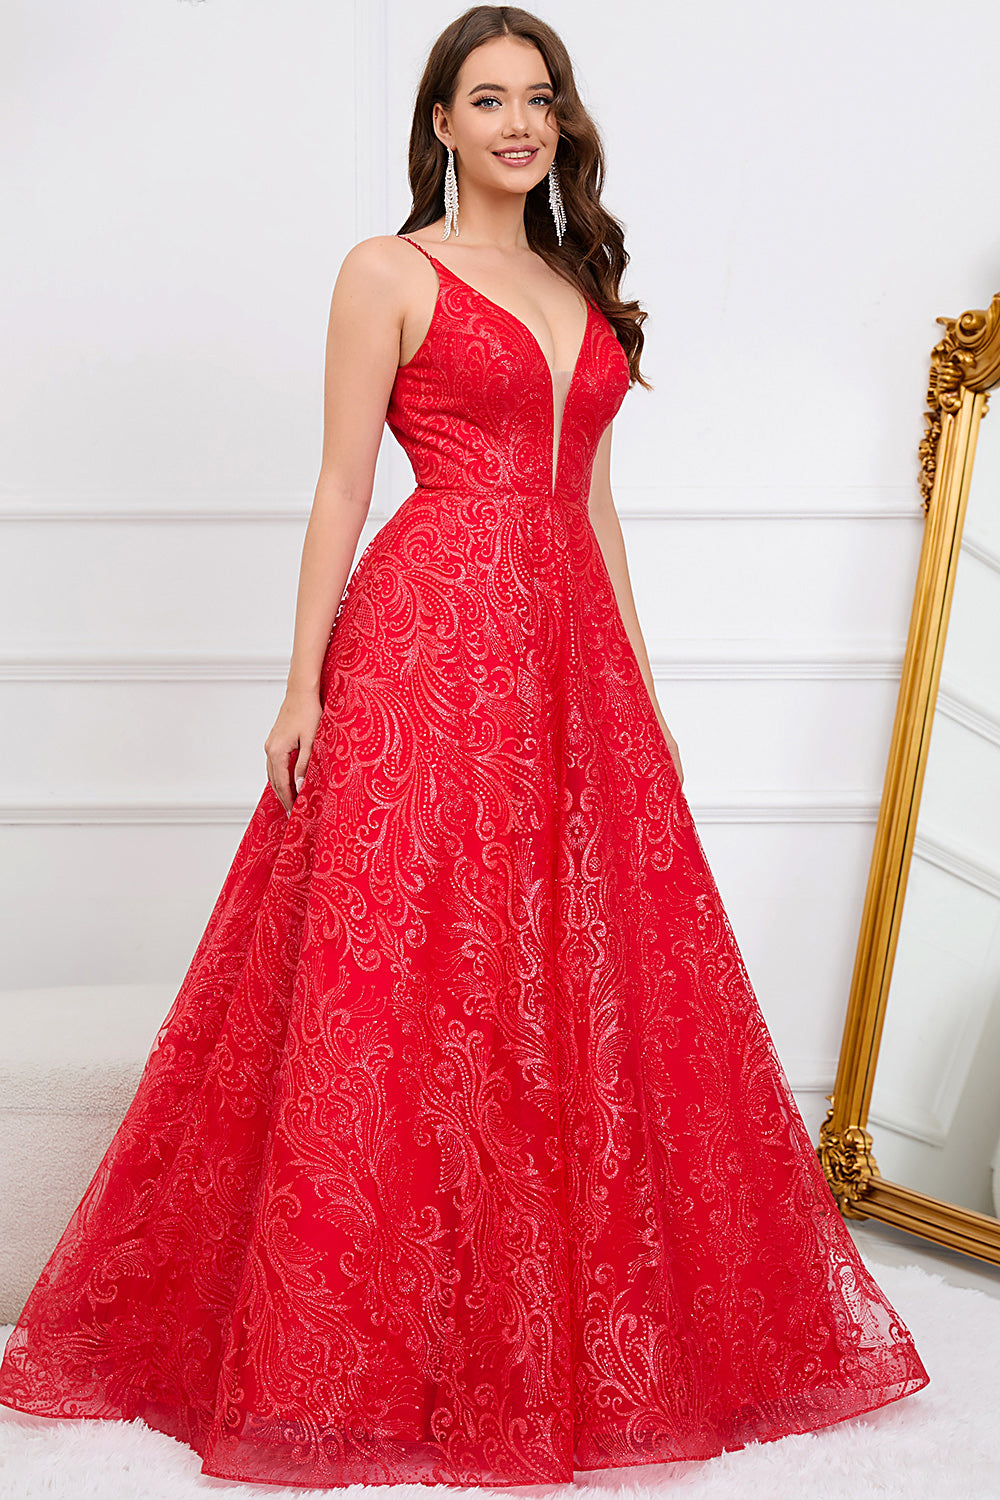 Sparkly Spaghetti Straps Red Long Prom Dress